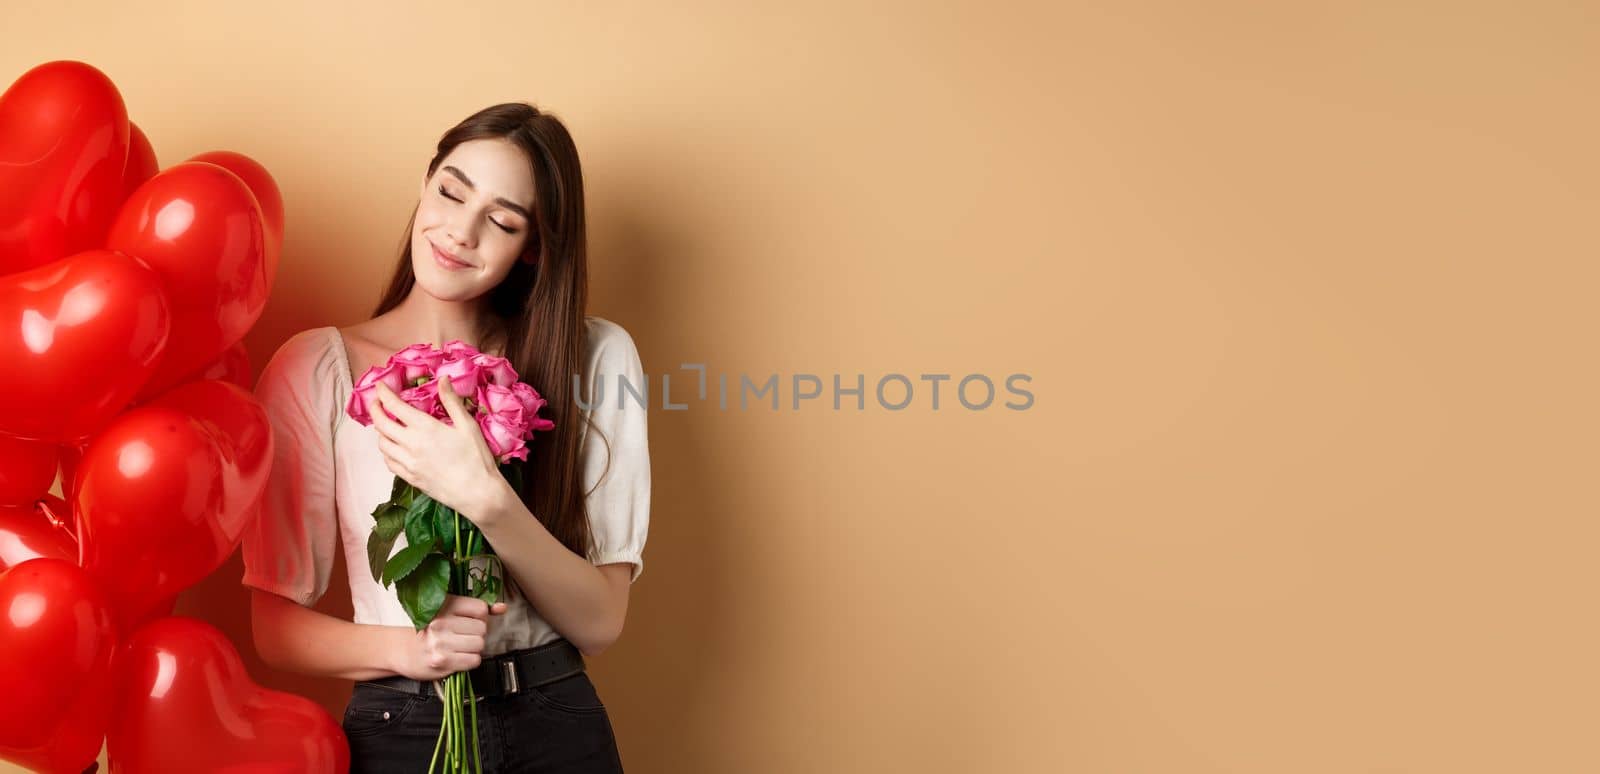 Sensual and romantic girl hugging bouquet of pink roses, smiling with eyes closed, thinking of lover, standing near Valentines day heart balloons, beige background.